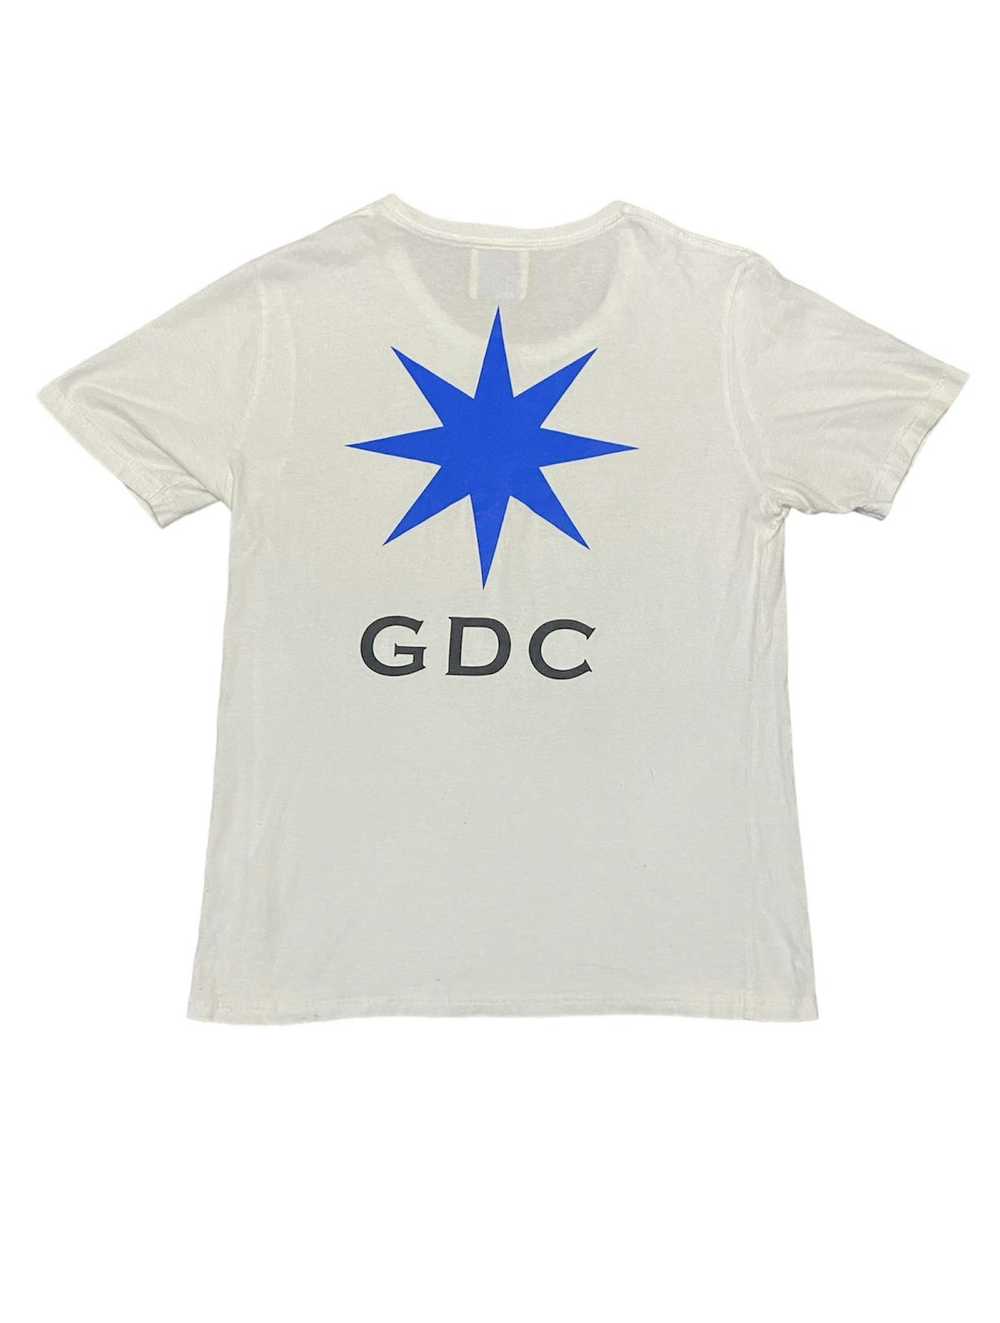 Japanese Brand × Narcotic Gdc × Streetwear Iconic… - image 1